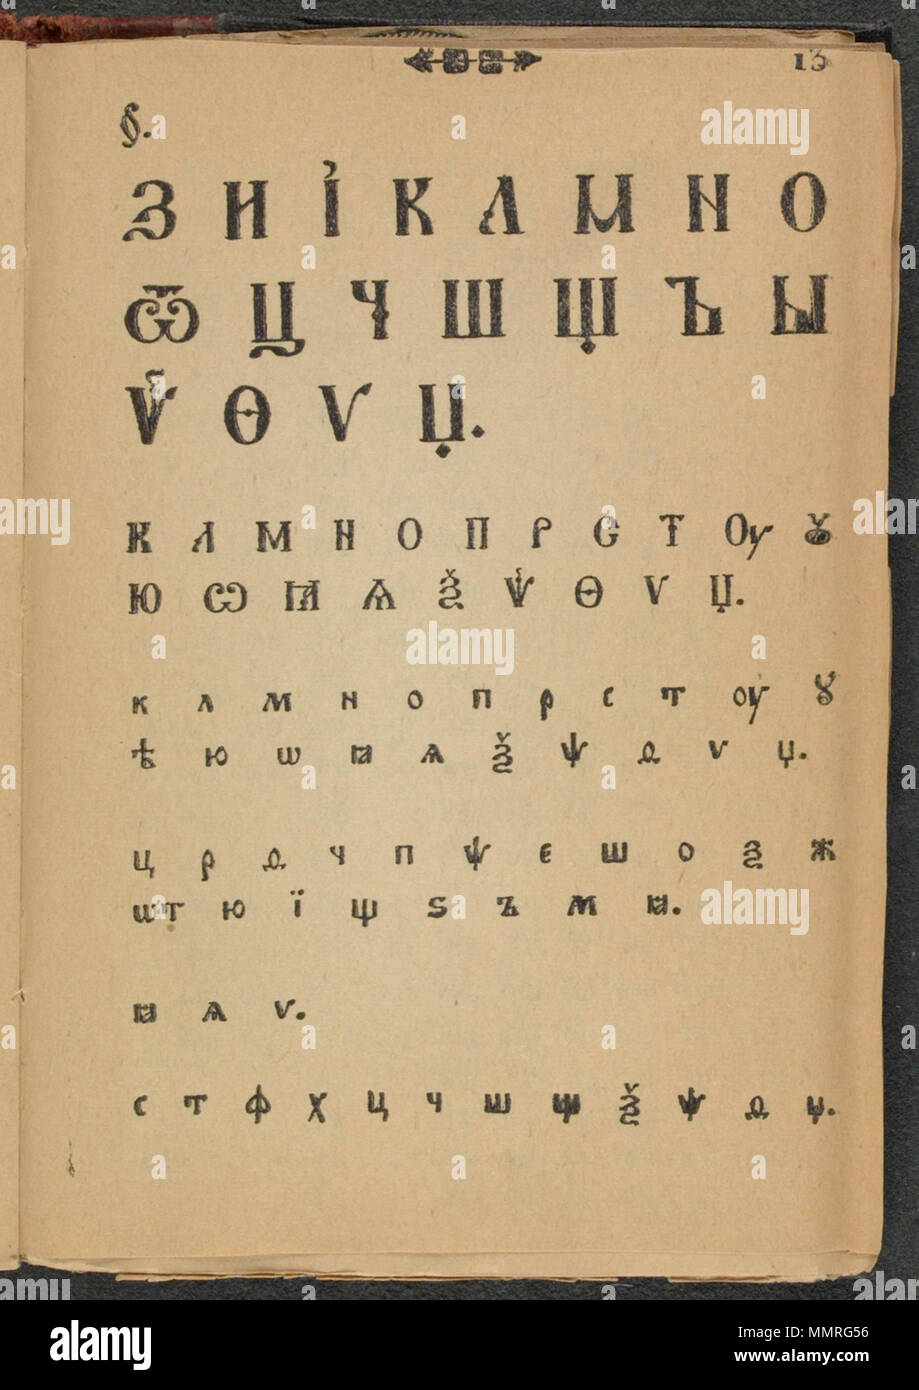 . Български: 133-та страница на Рибния буквар English: Beron’s Primer with Various Instructions is the first modern Bulgarian primer. Used by children throughout the 19th century, it contained, in addition to the rules of grammar, general information about nature and basic arithmetic. The book is better known as the “Fish Primer” for the picture of the whale at the end. Beron is considered the father of modern Bulgarian. Beron primer page 17 Stock Photo